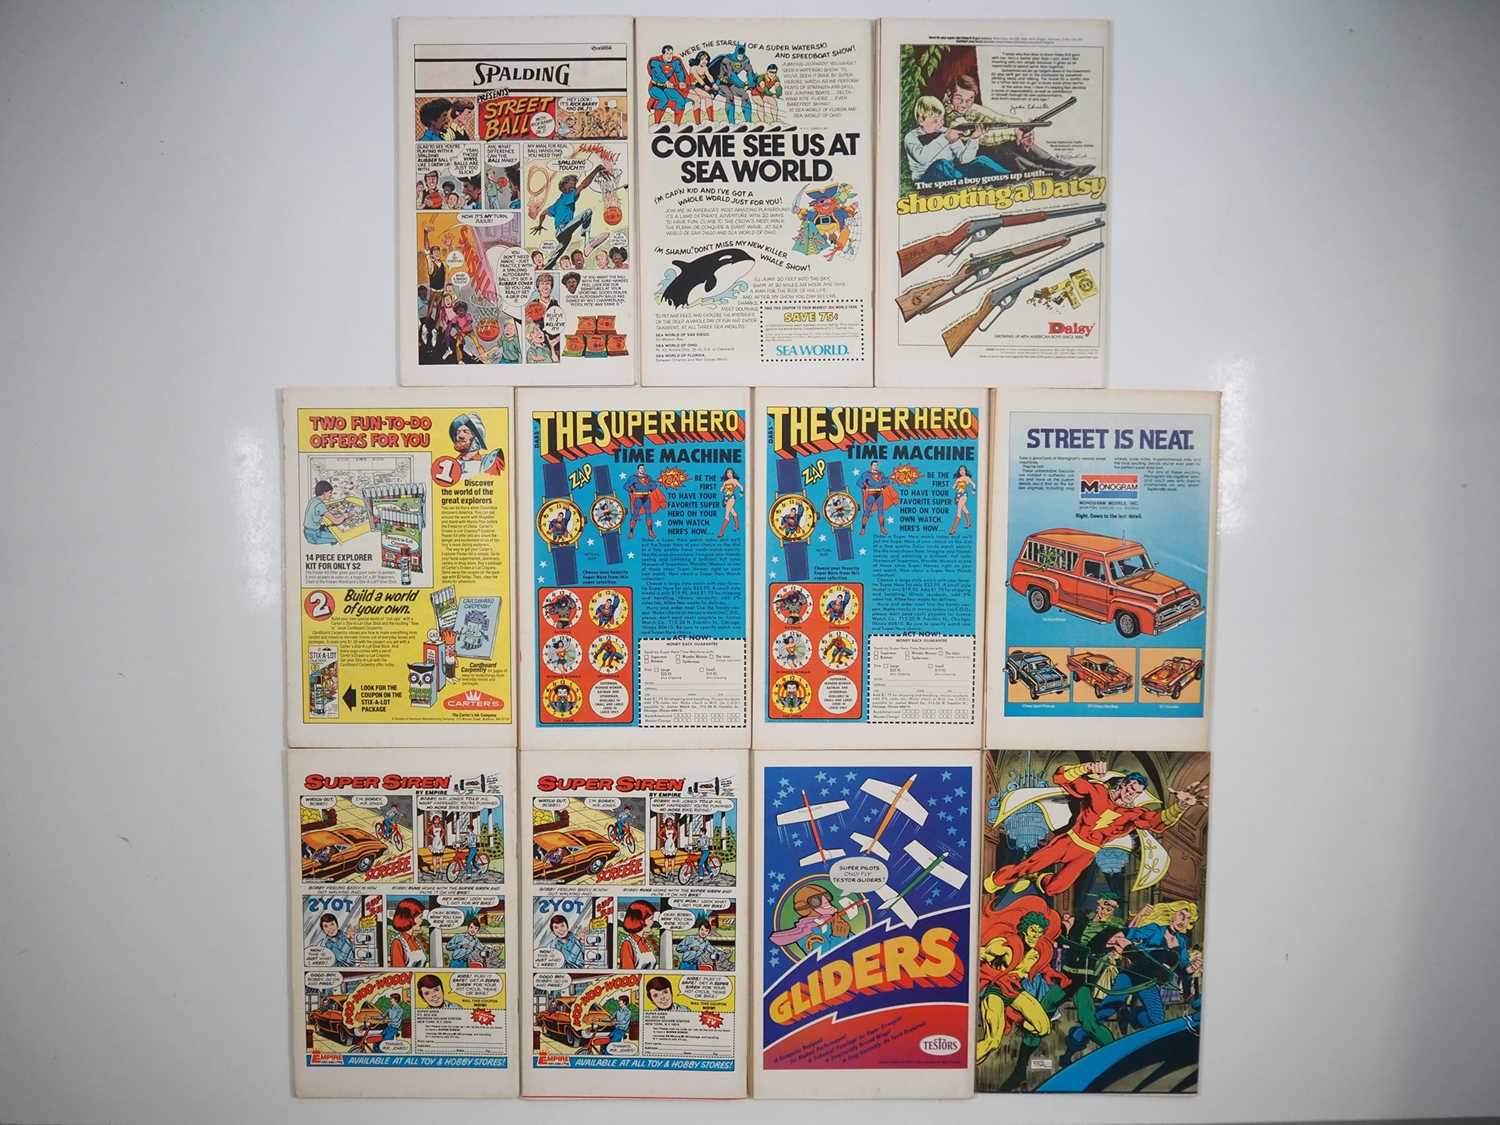 WORLDS FINEST #245, 246, 247, 248, 249 (x 2), 250, 251 (x2), 252, 253 (11 in Lot) - (1977/1978 - DC) - Image 2 of 2